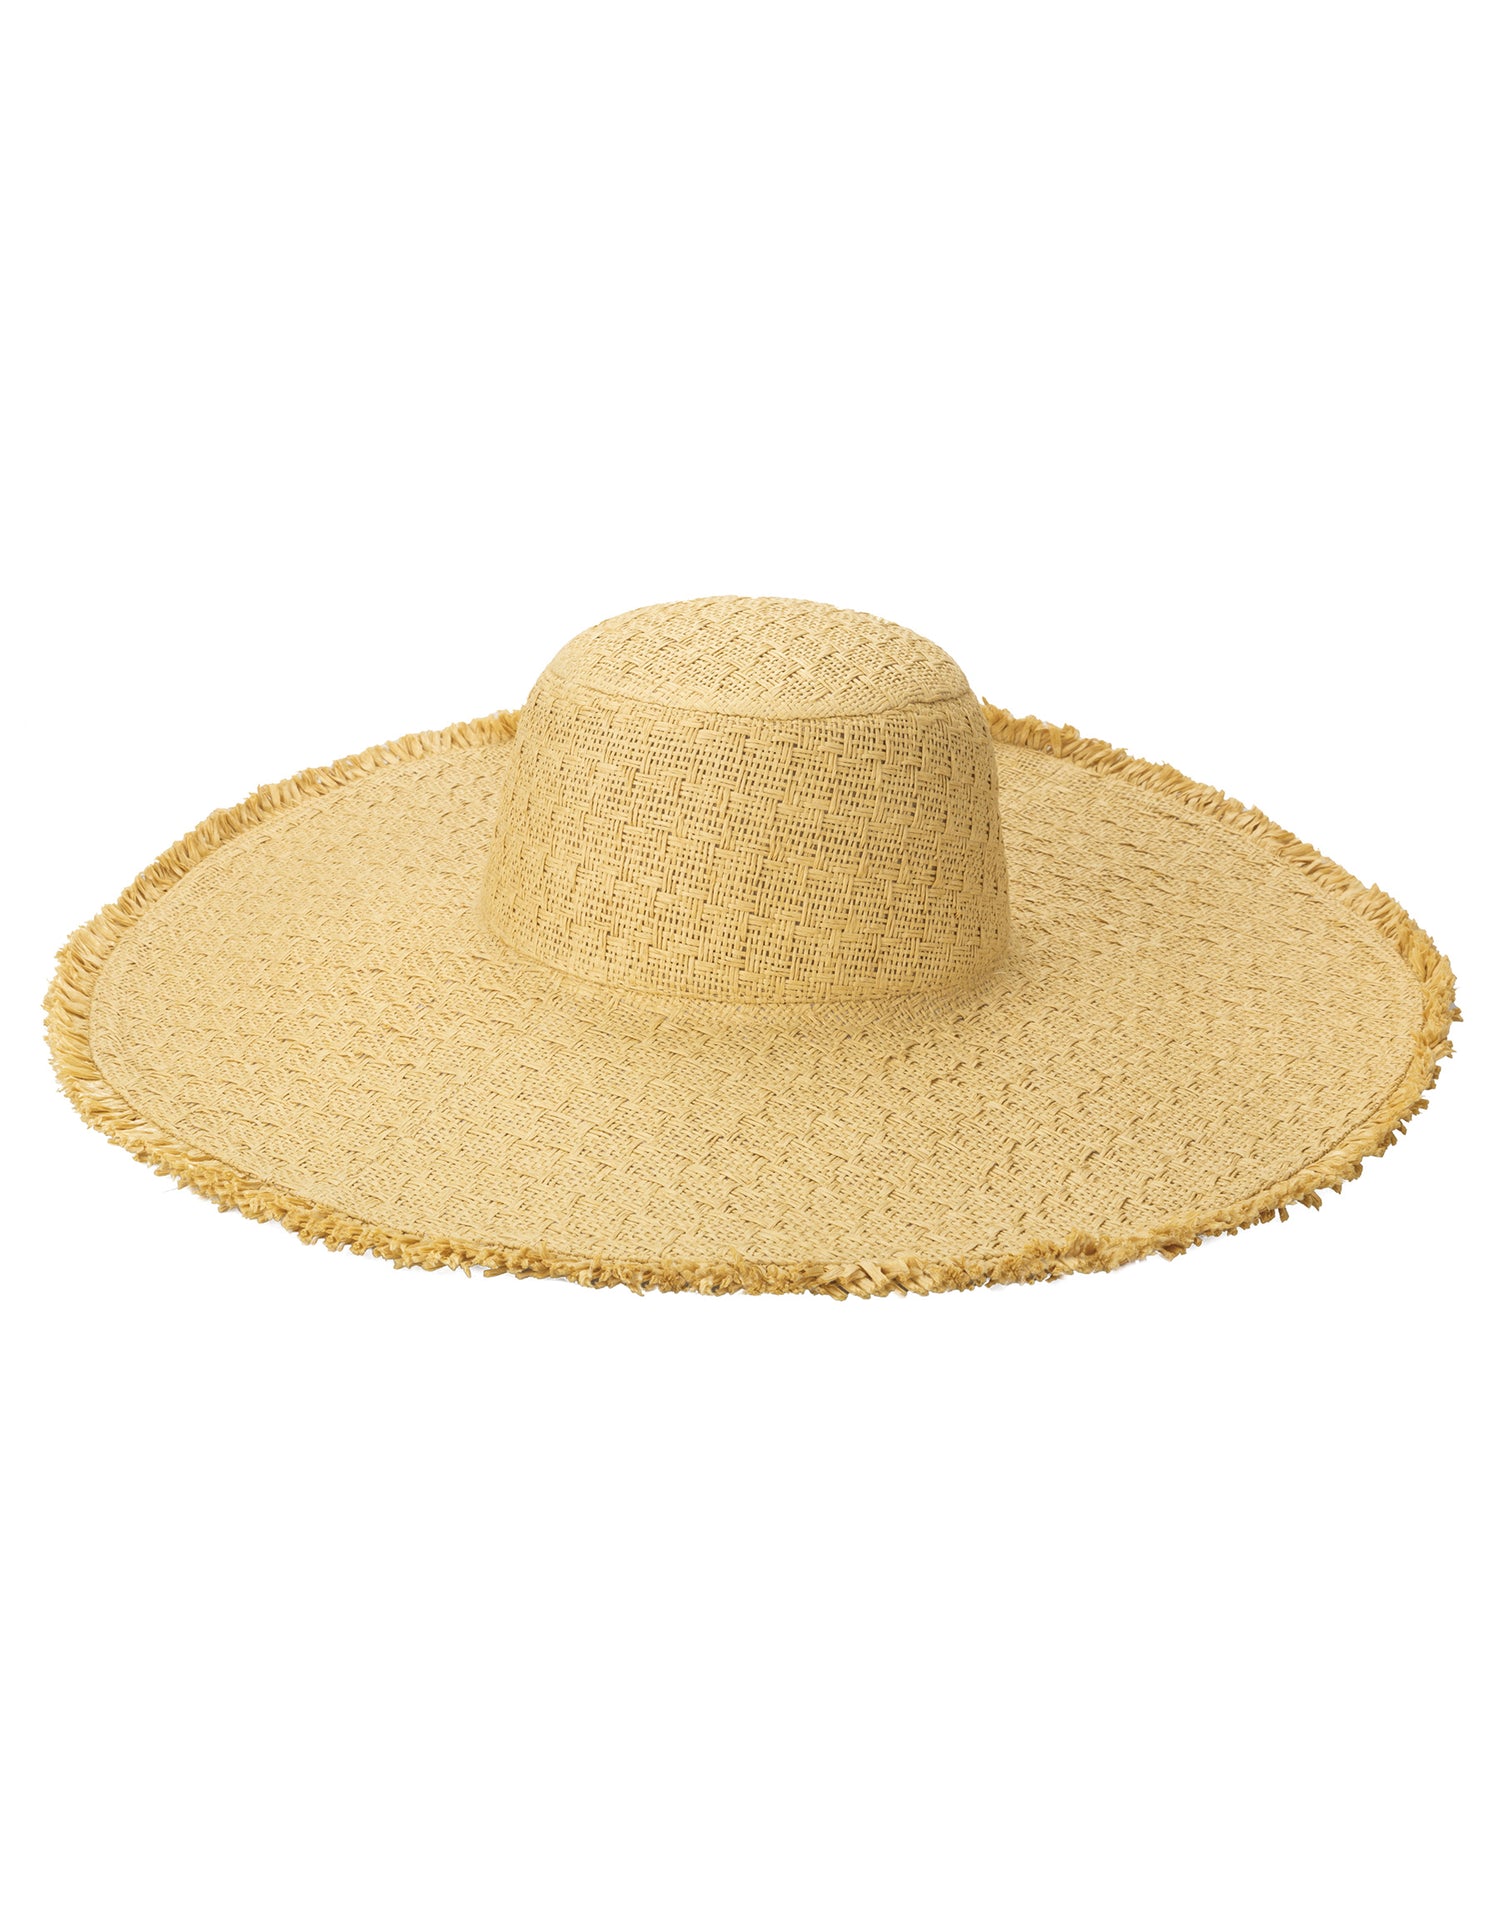 Cut & Sew Textured Weave Floppy Hat with Frayed Edge in Natural by San Diego Hat Company - Product View